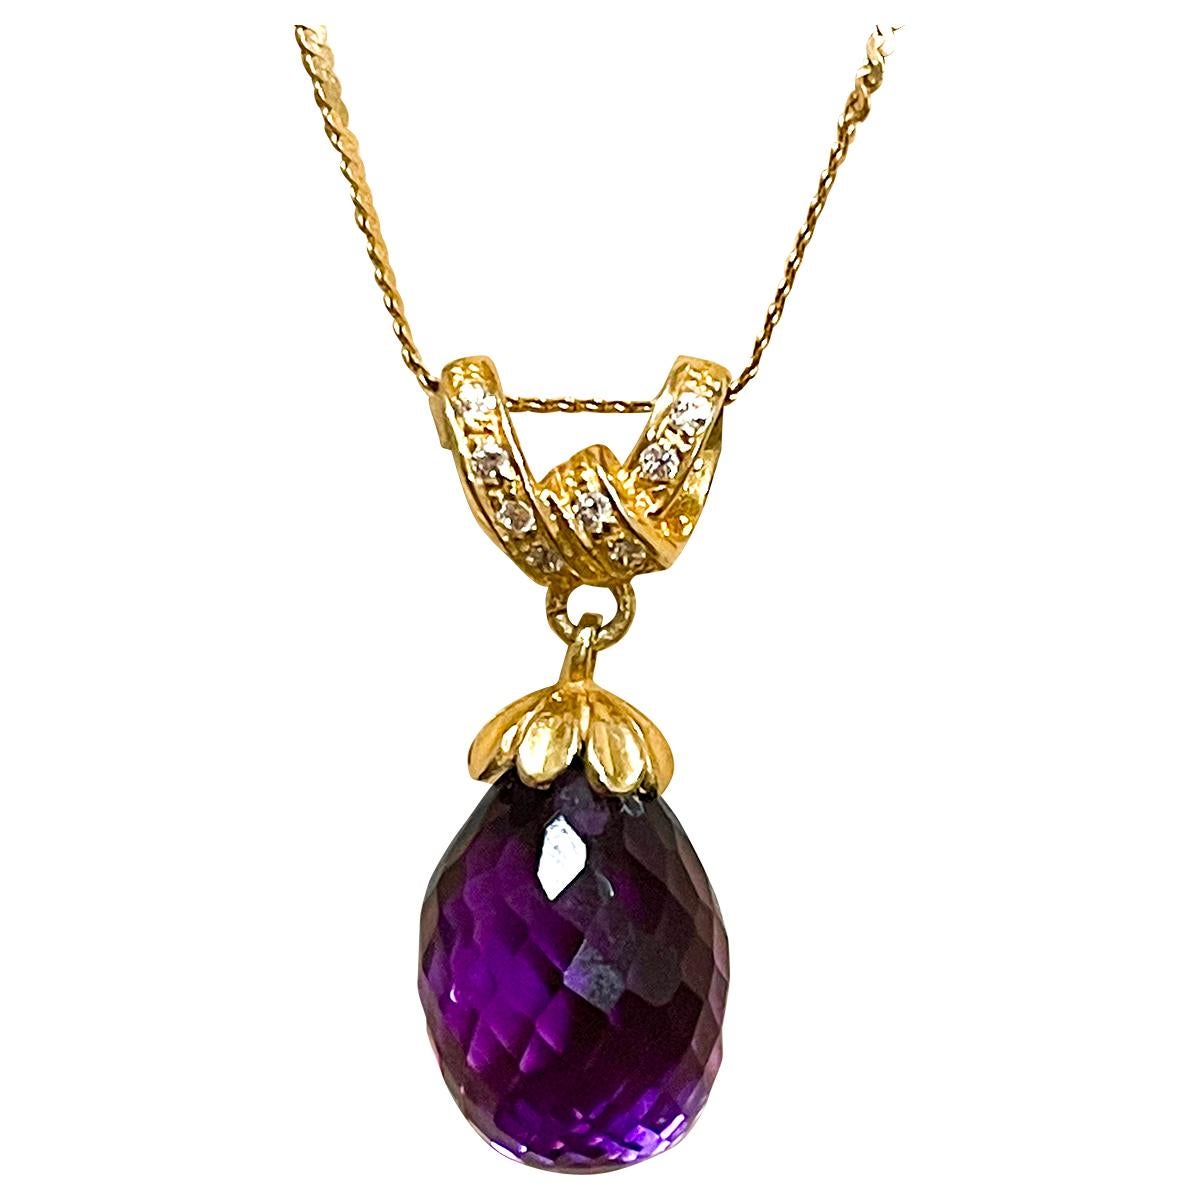 Approximately 12 Ct Checkerboard Amethyst Drop & Diamond Pendent/Necklace 14 Karat Yellow Gold Chain
One Large  Drop of natural Amethyst which has checkerboard design and a diamond designed bow and cap on it.
Pendant necklace is a eye-catching